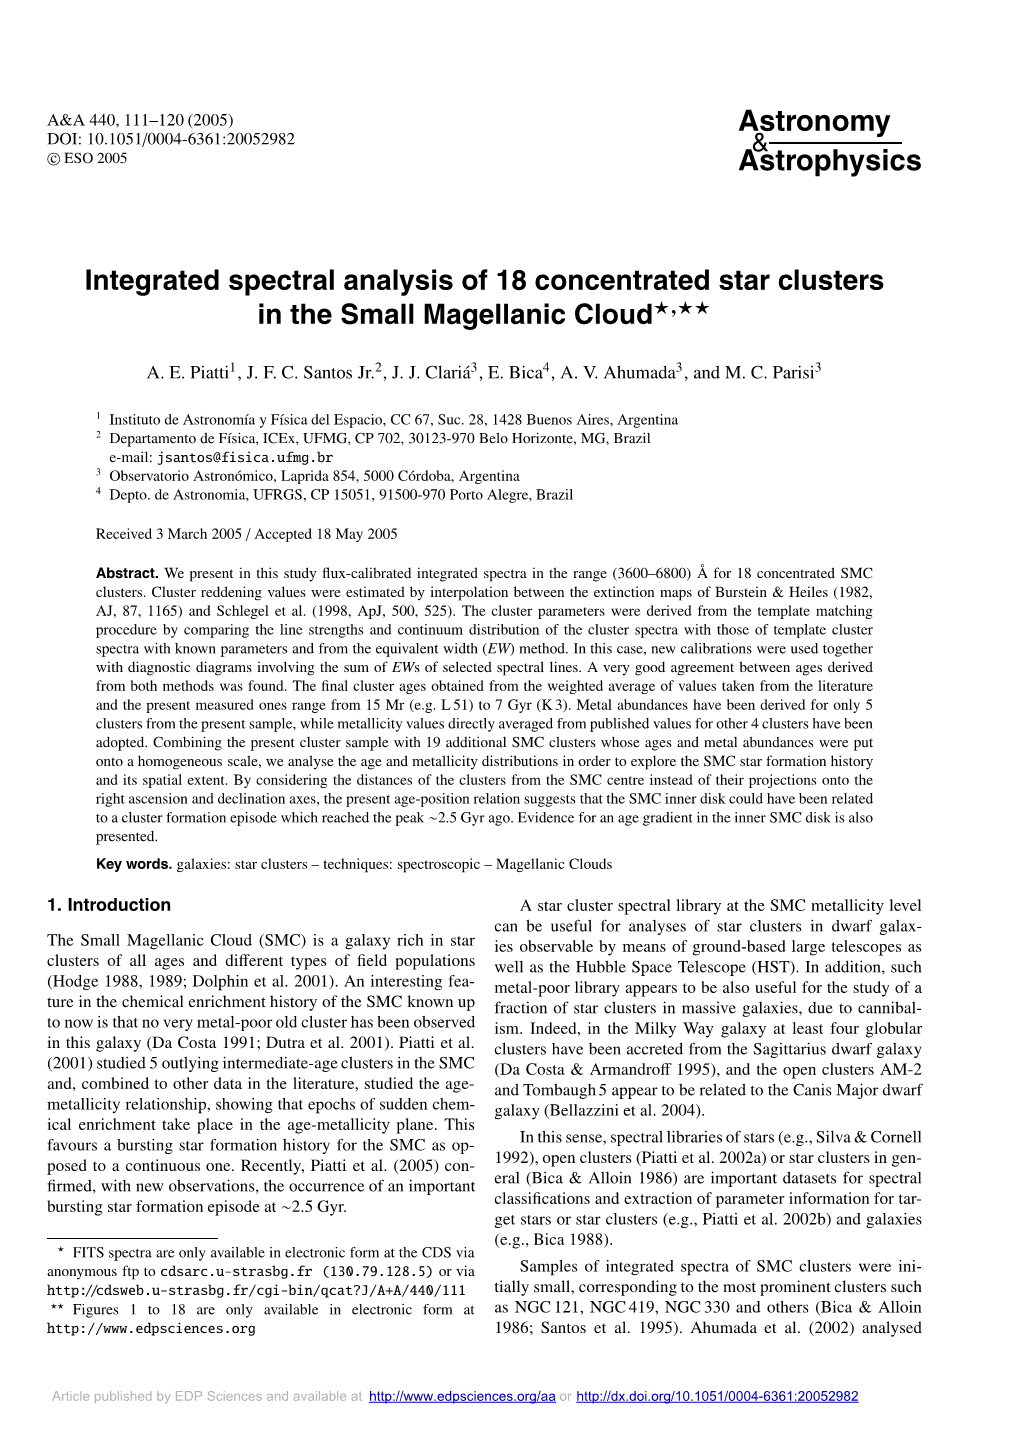 Integrated Spectral Analysis of 18 Concentrated Star Clusters in the Small Magellanic Cloud�,